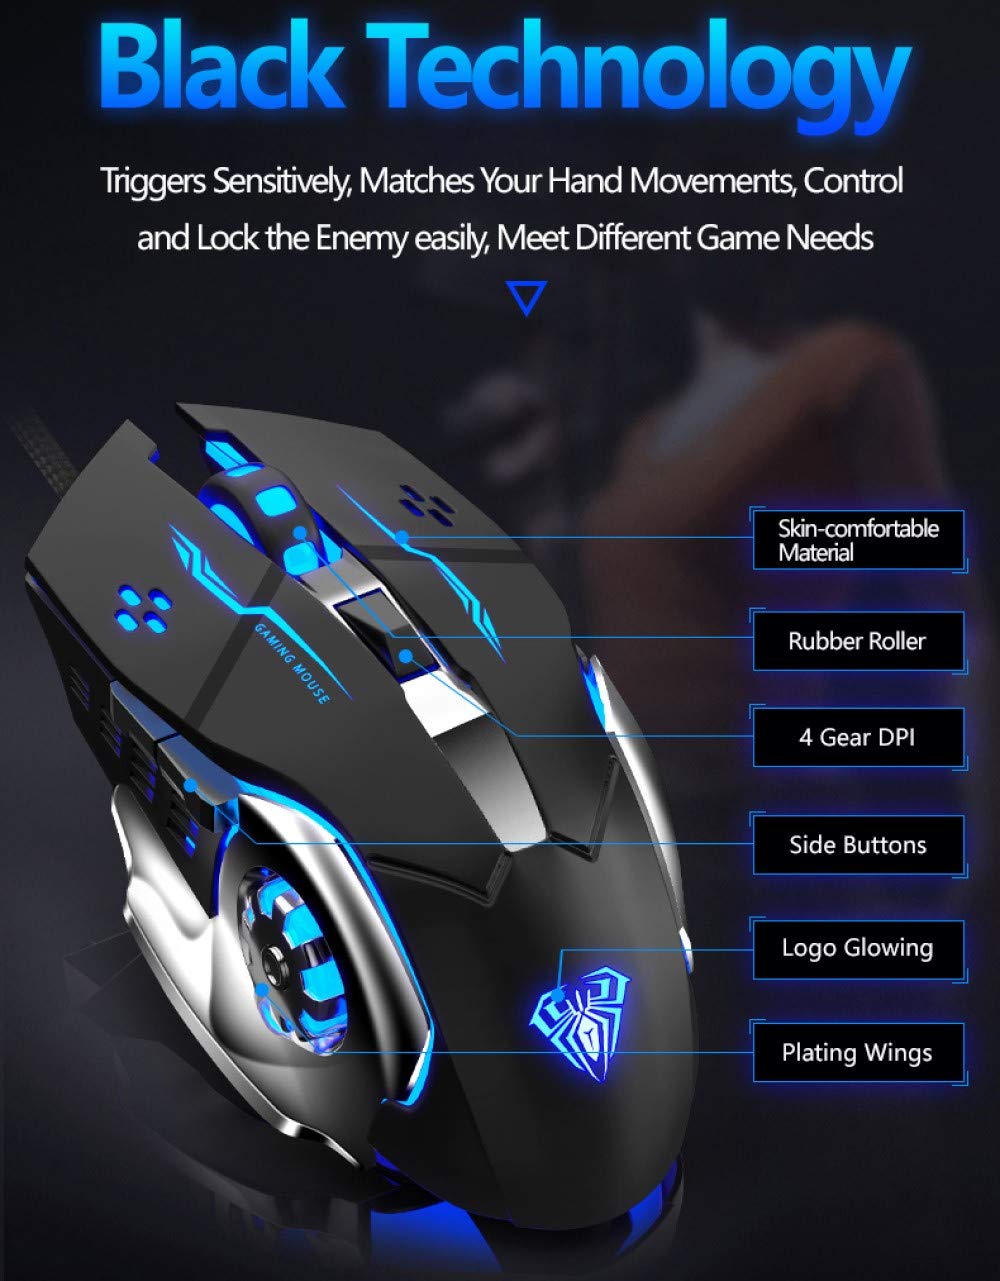 Gaming Mouse, Ergonomic USB Wired Gaming Optical Mice with 6 Programmable Buttons and 4 Colors LED Backlight, 4 DPI Settings Up to 2400 DPI Computer Mouse for Laptop PC Games & Work(Black)